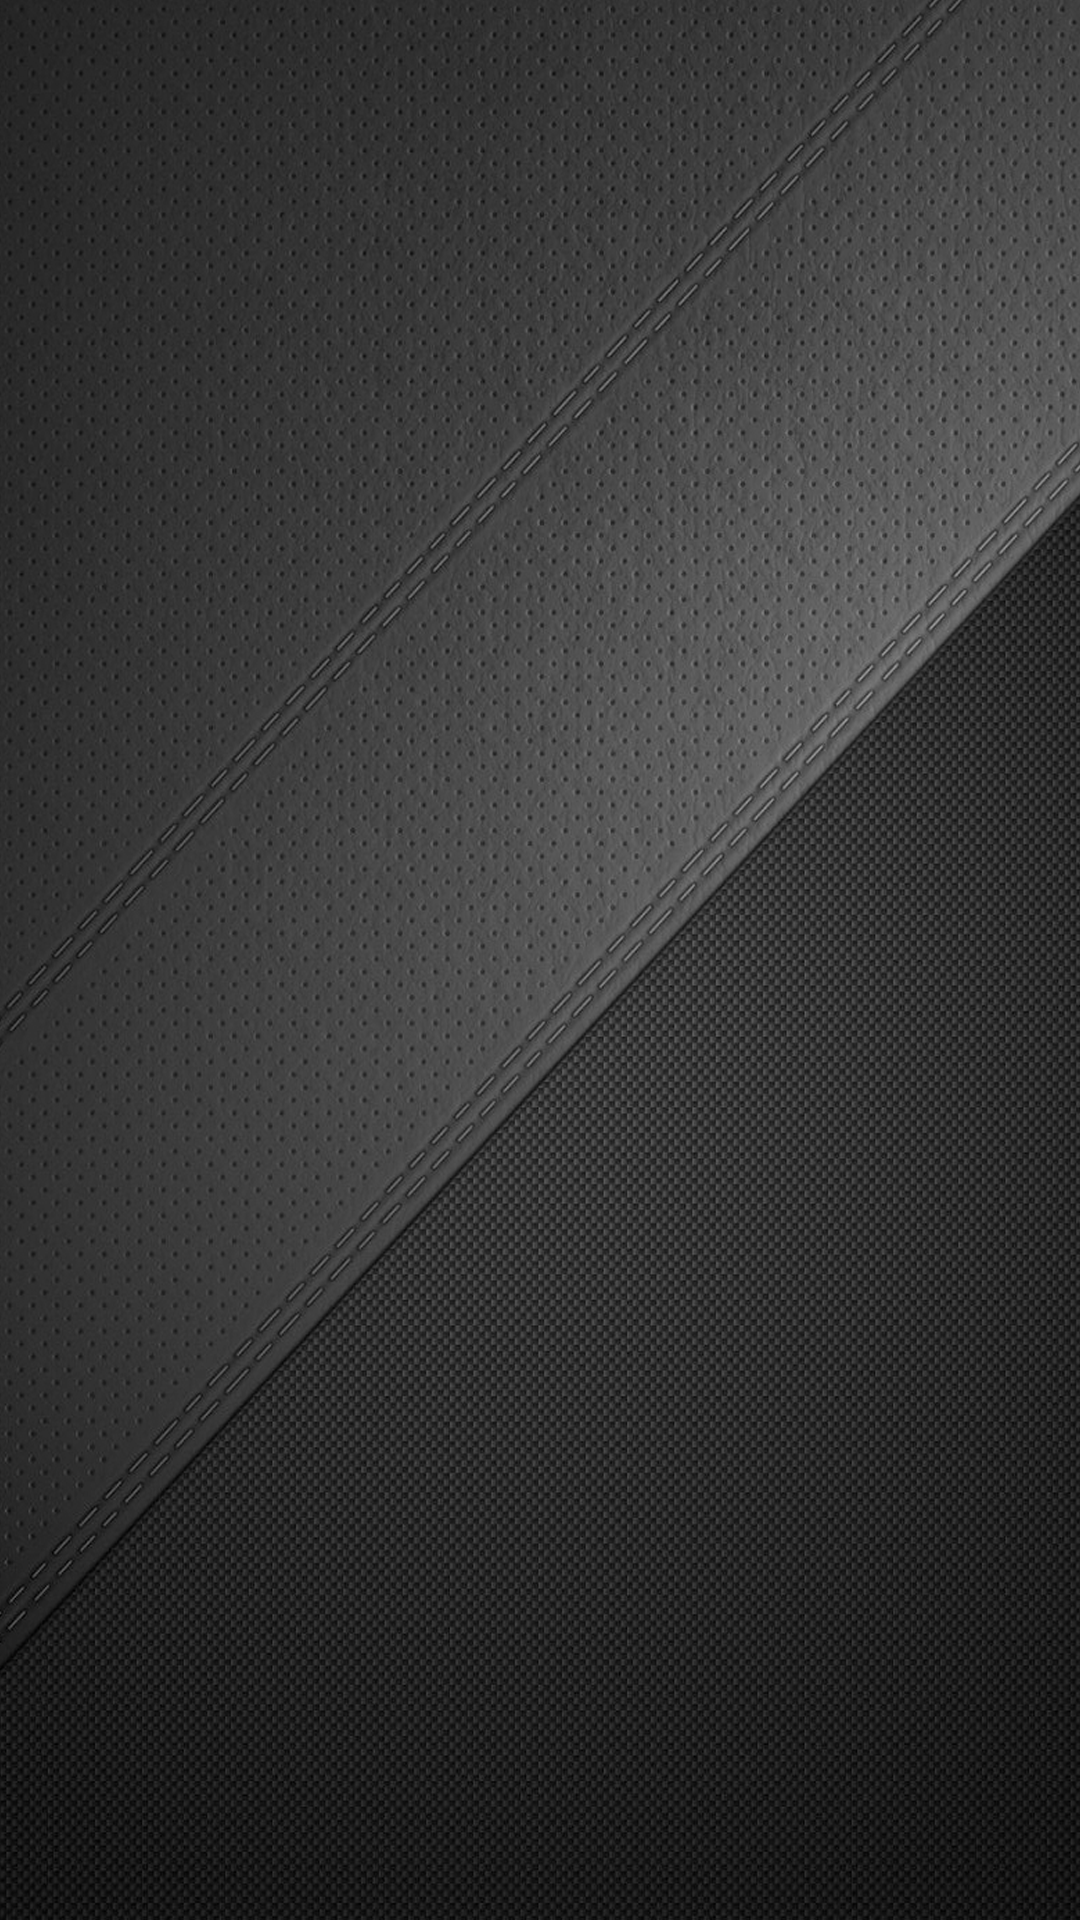 Leather Htc One Wallpaper Best And Easy To